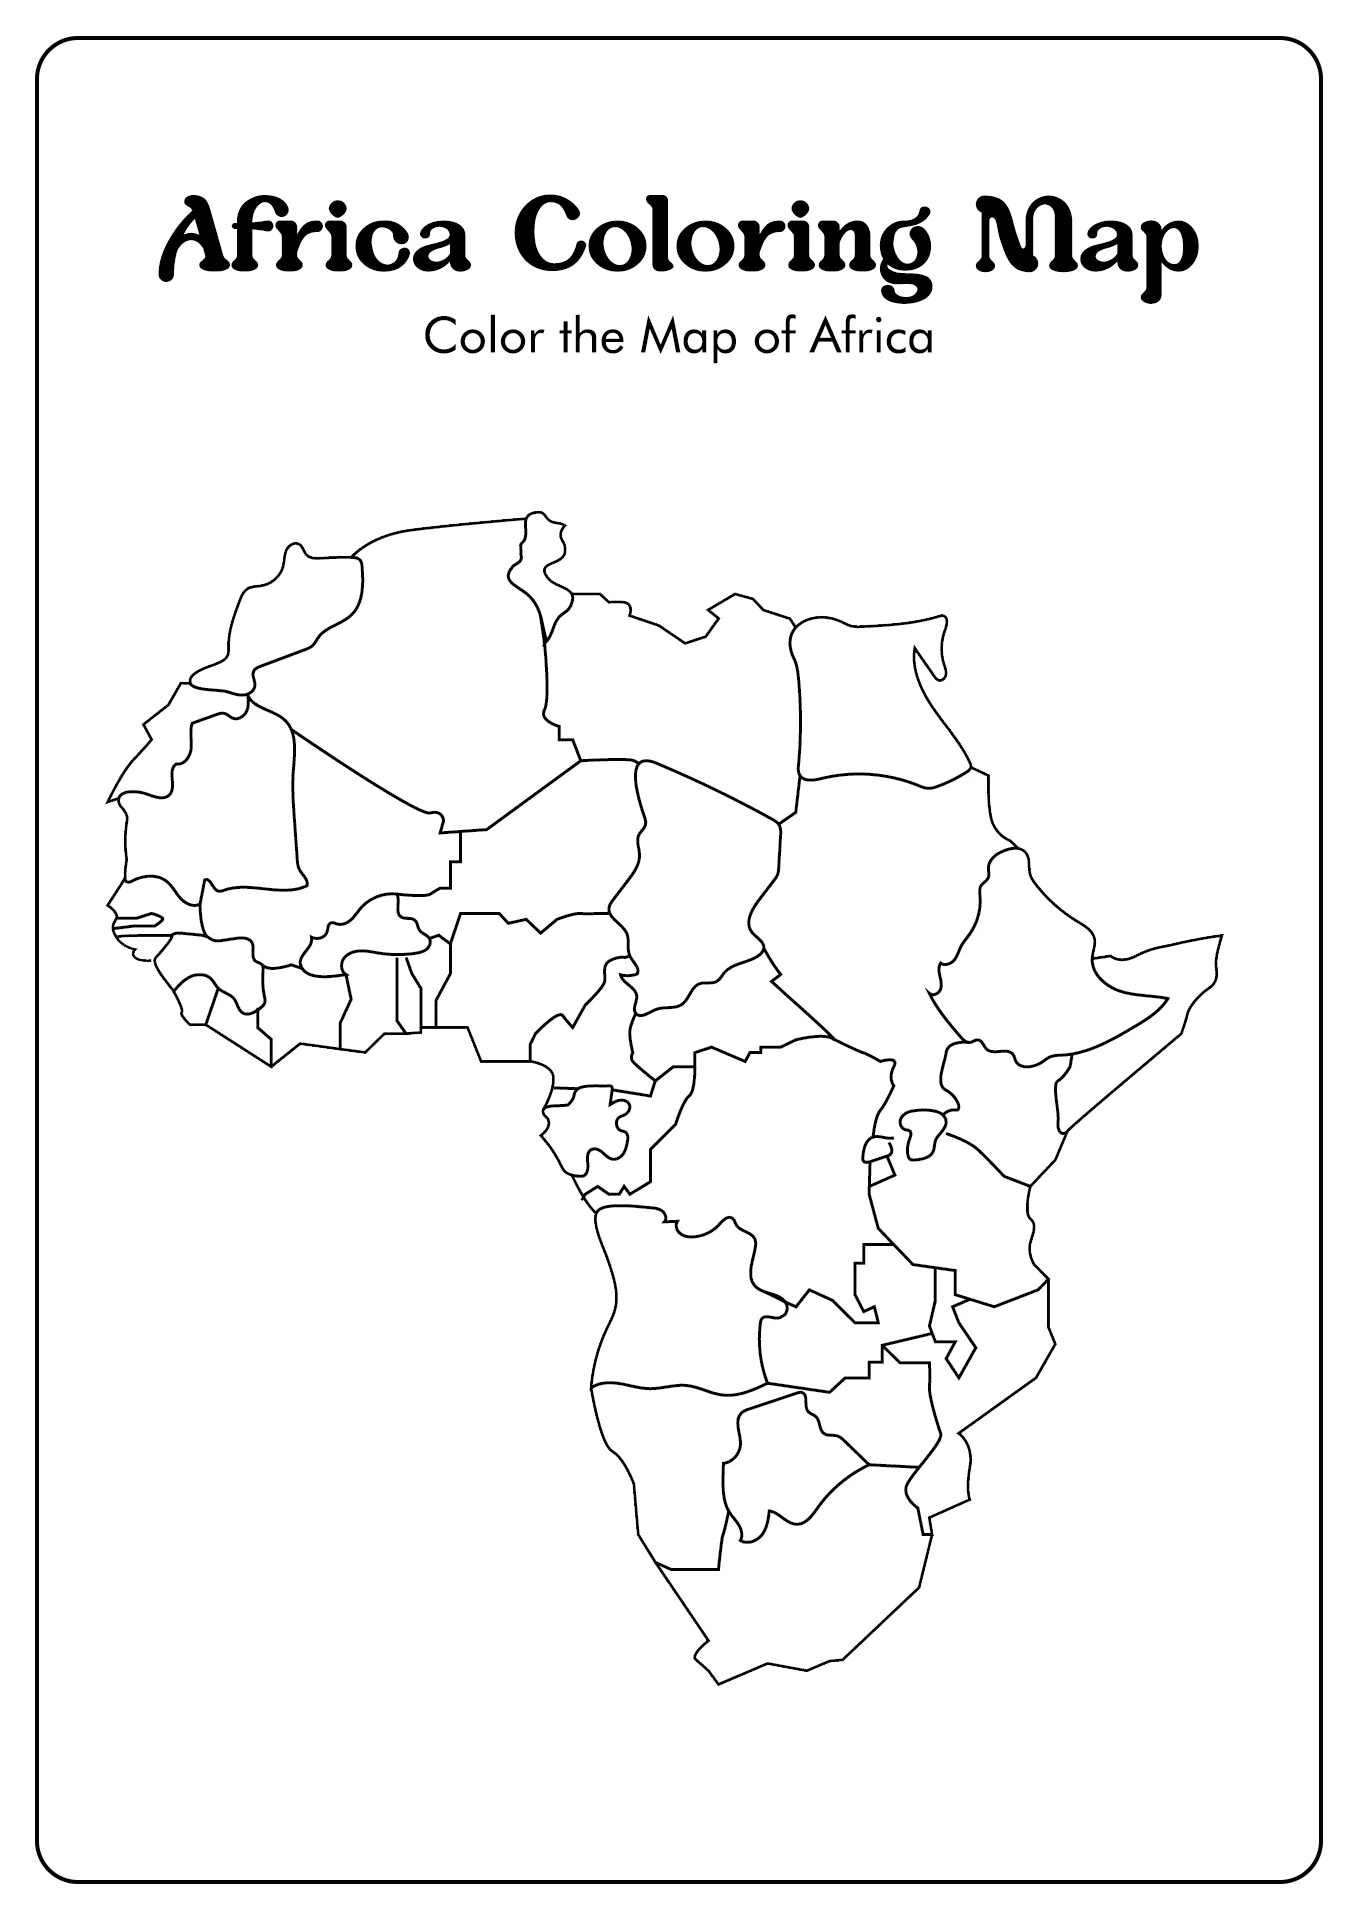 Maps Of Africa Coloring Pages African Maps Images The Best Porn